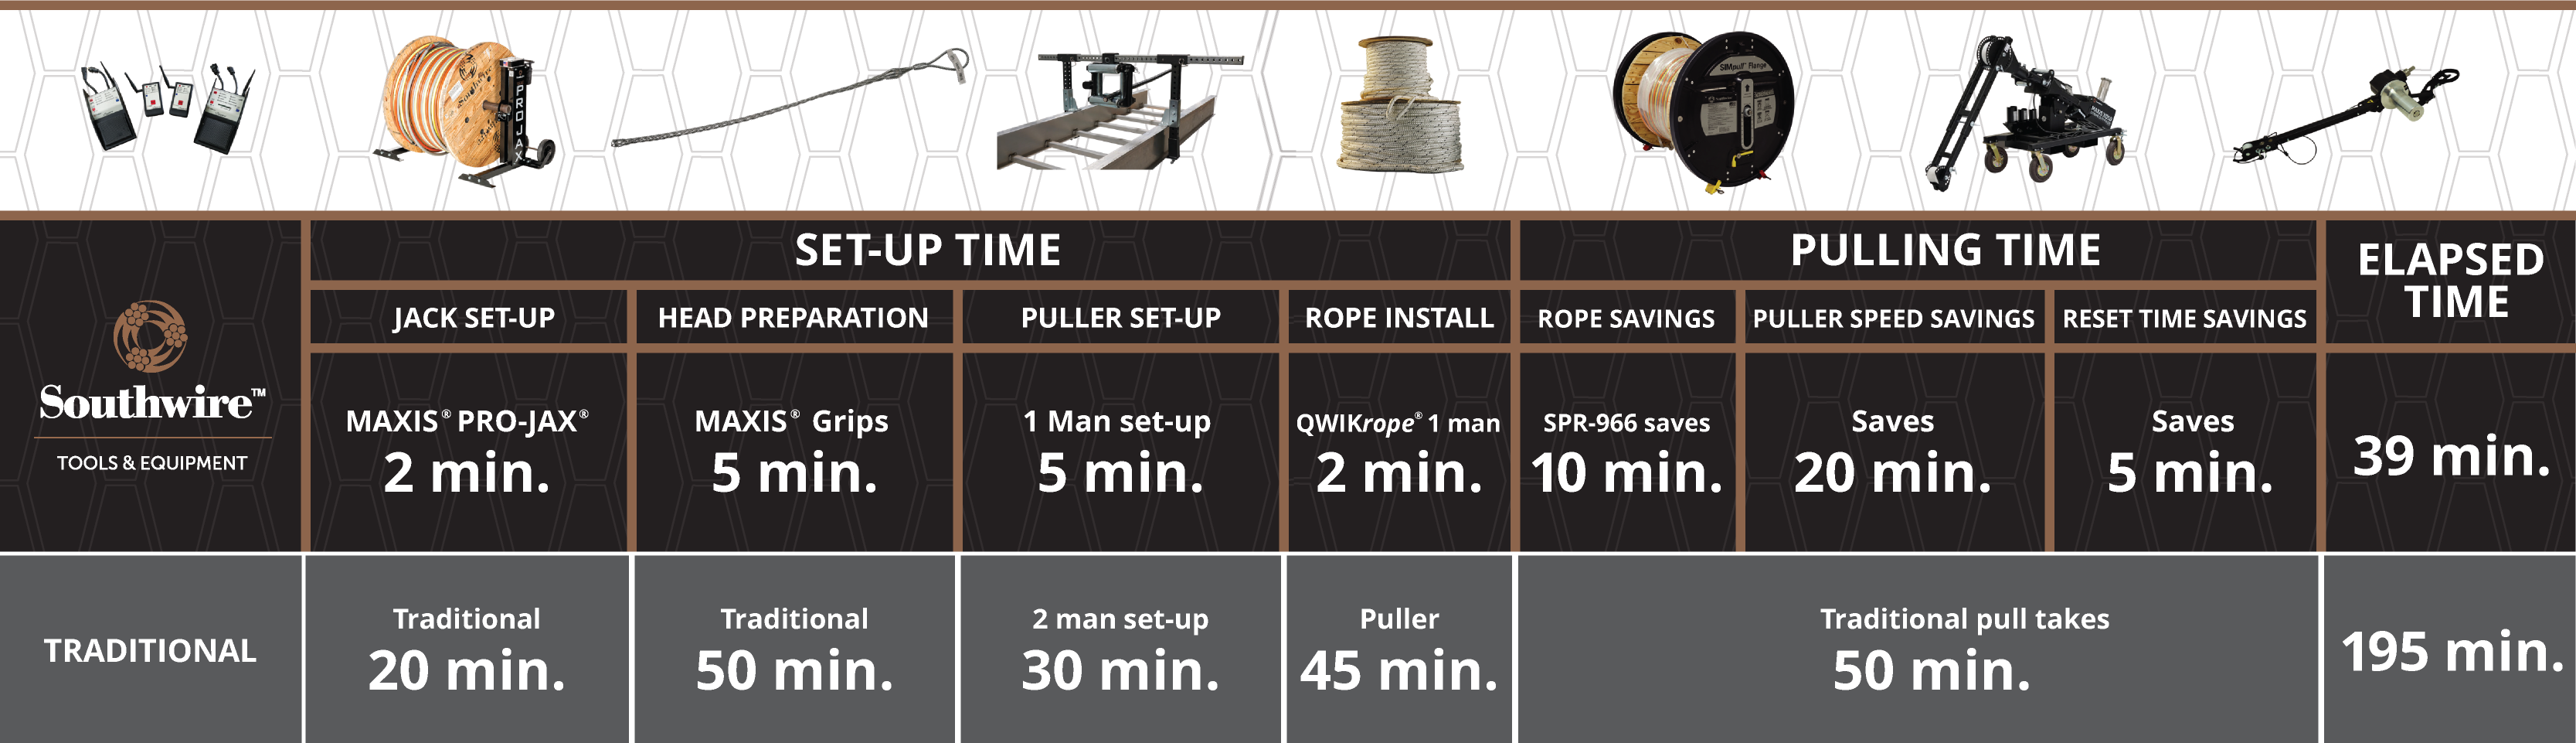 TCAS - Cable Pulling Tools SIMpull Solutions® - Cable Pulling Equipment Infographic